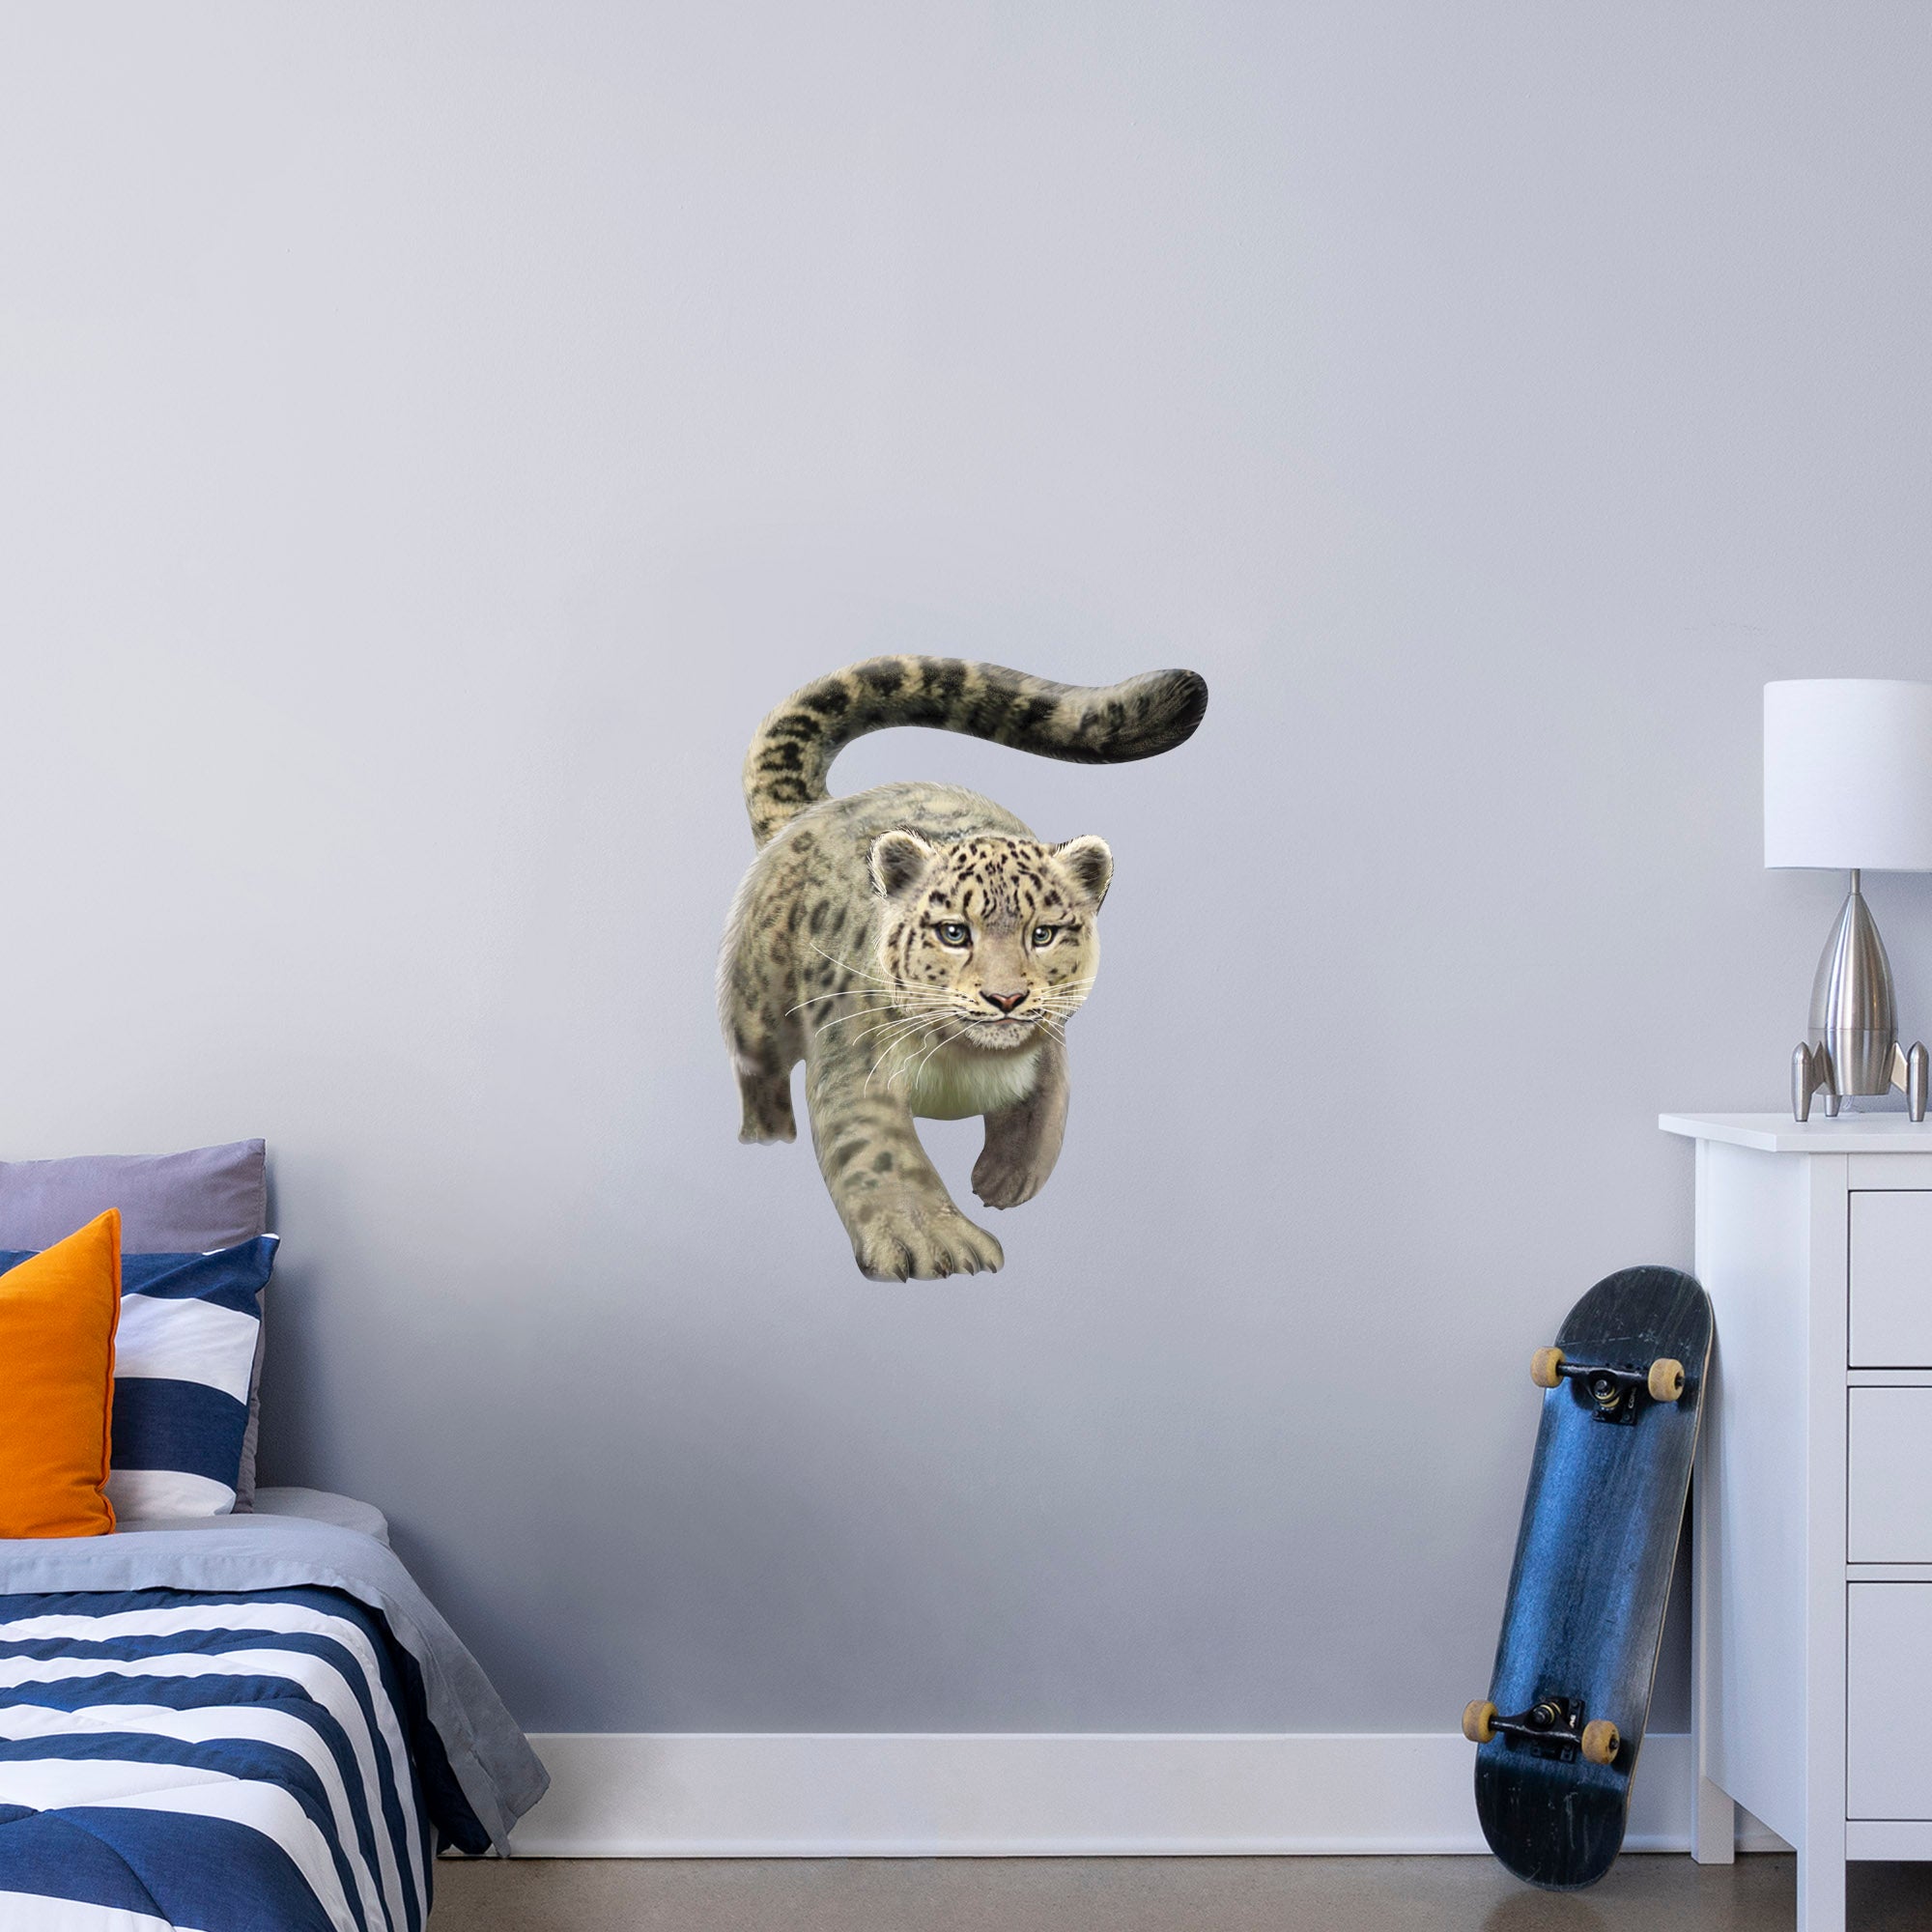 Snow Leopard - Removable Wall Decal XL by Fathead | Vinyl